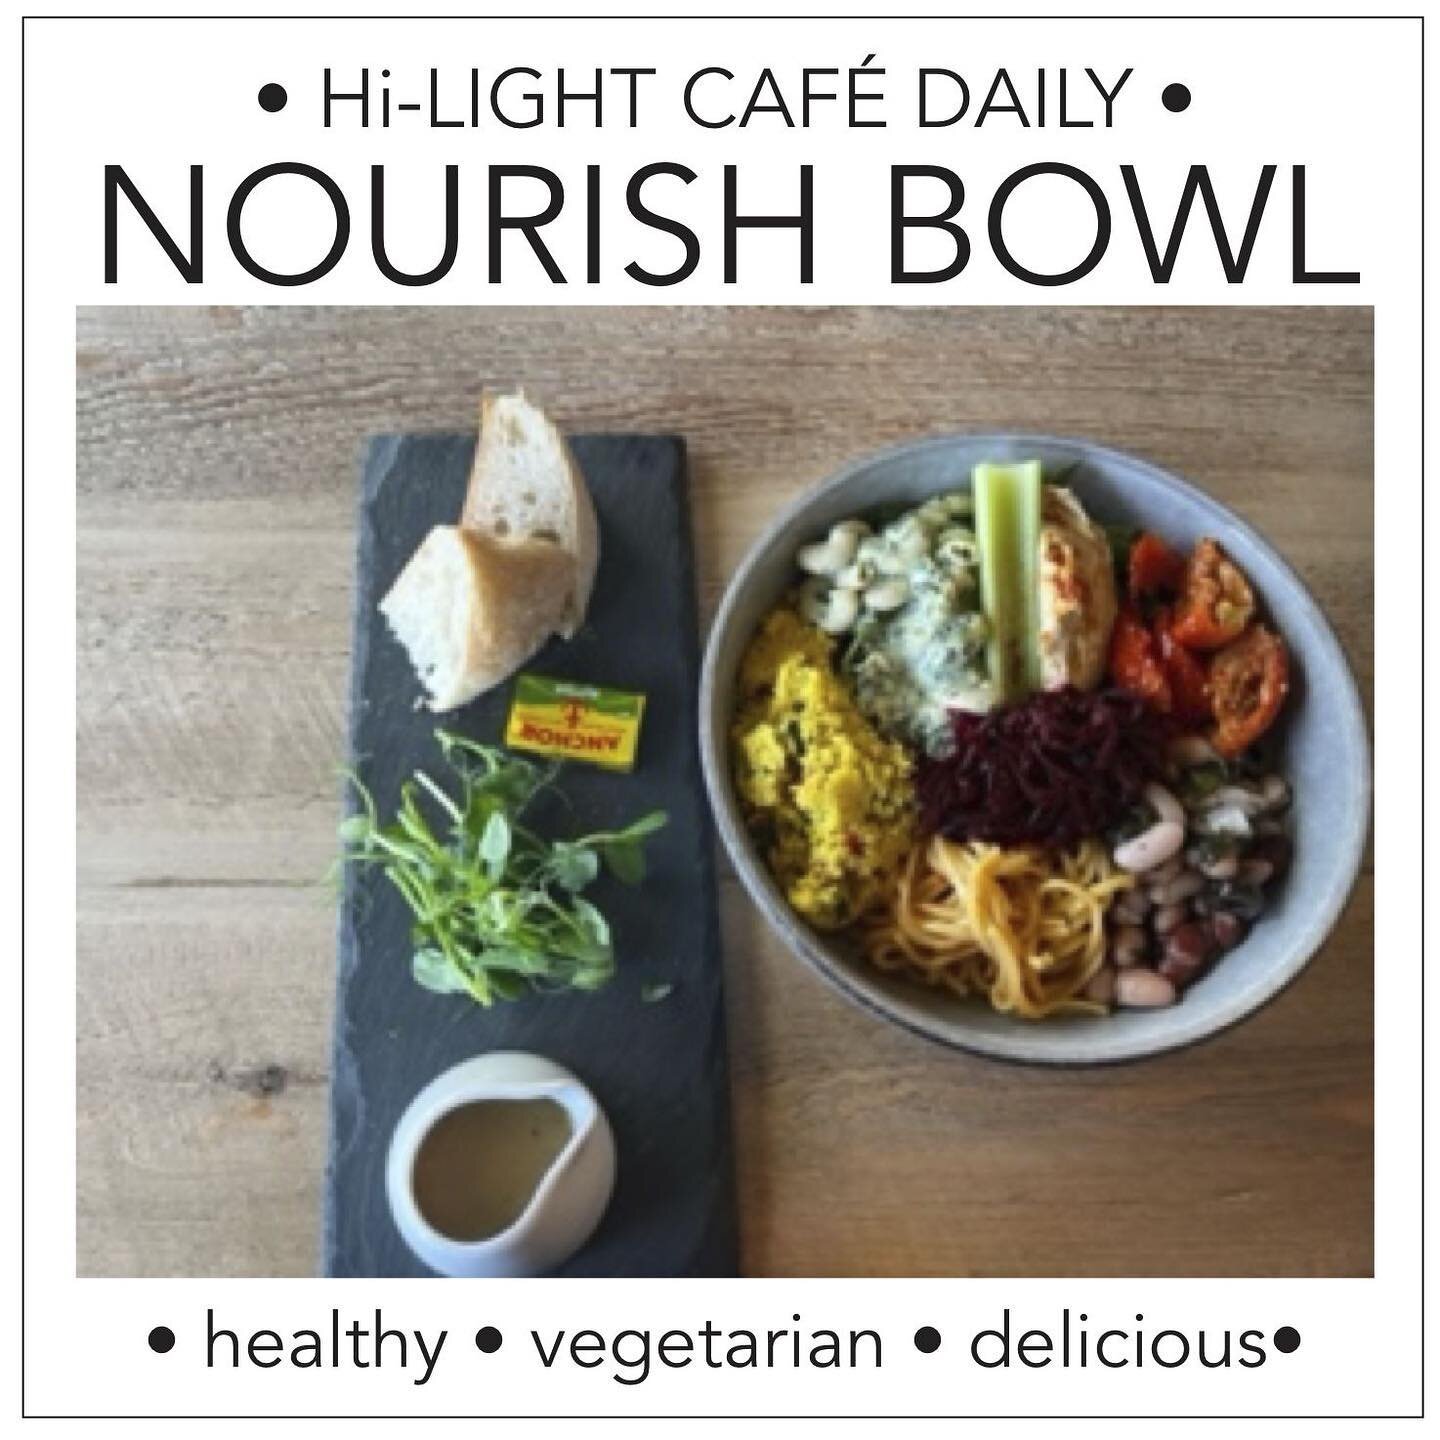 🍃NEW ON THE MENU🍃 
Looking for a healthy, tasty, vegetarian lunch? Try our fab new NOURISH BOWL! Looks beautiful, tastes delicious and will keep you going! 🍃&hellip; different ingredients daily! &hellip;

#gloucester #gloucestercoffee #gloucesterc